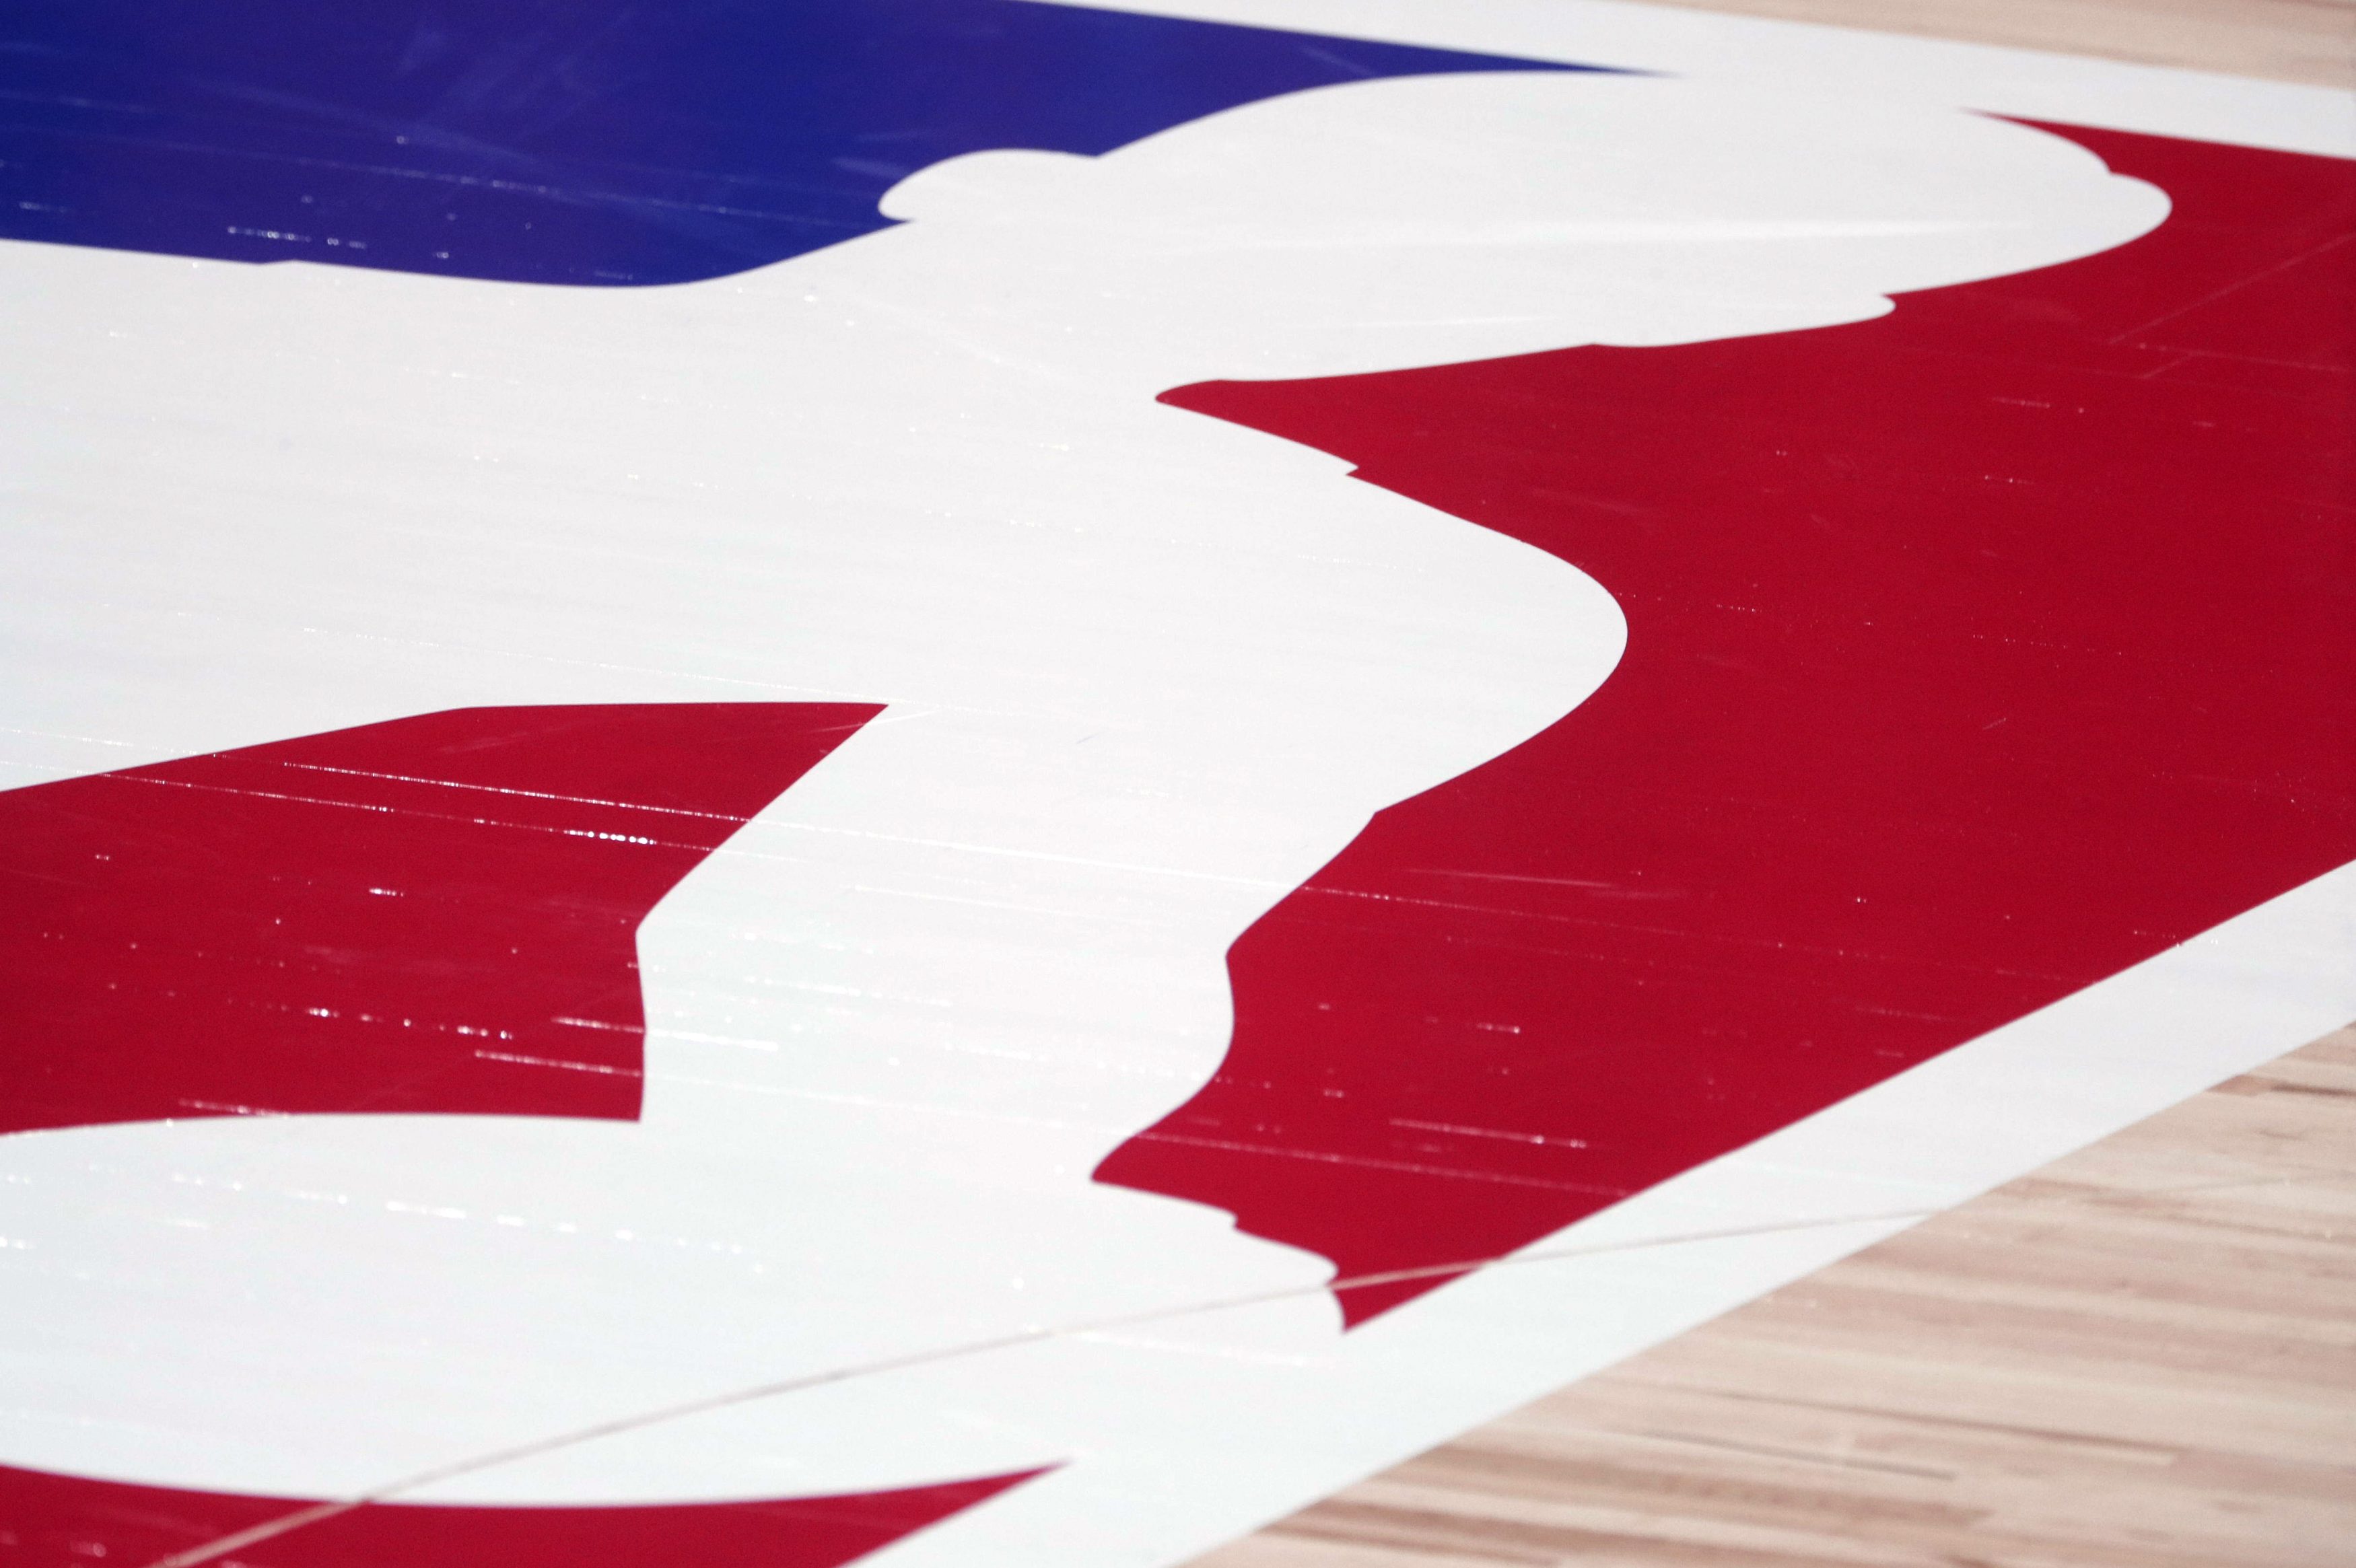 Closeup of the NBA logo on court before a playoff game. Unvaccinated players now face additional hurdles in certain cities if they want to play (including not being able to play in certain arenas)